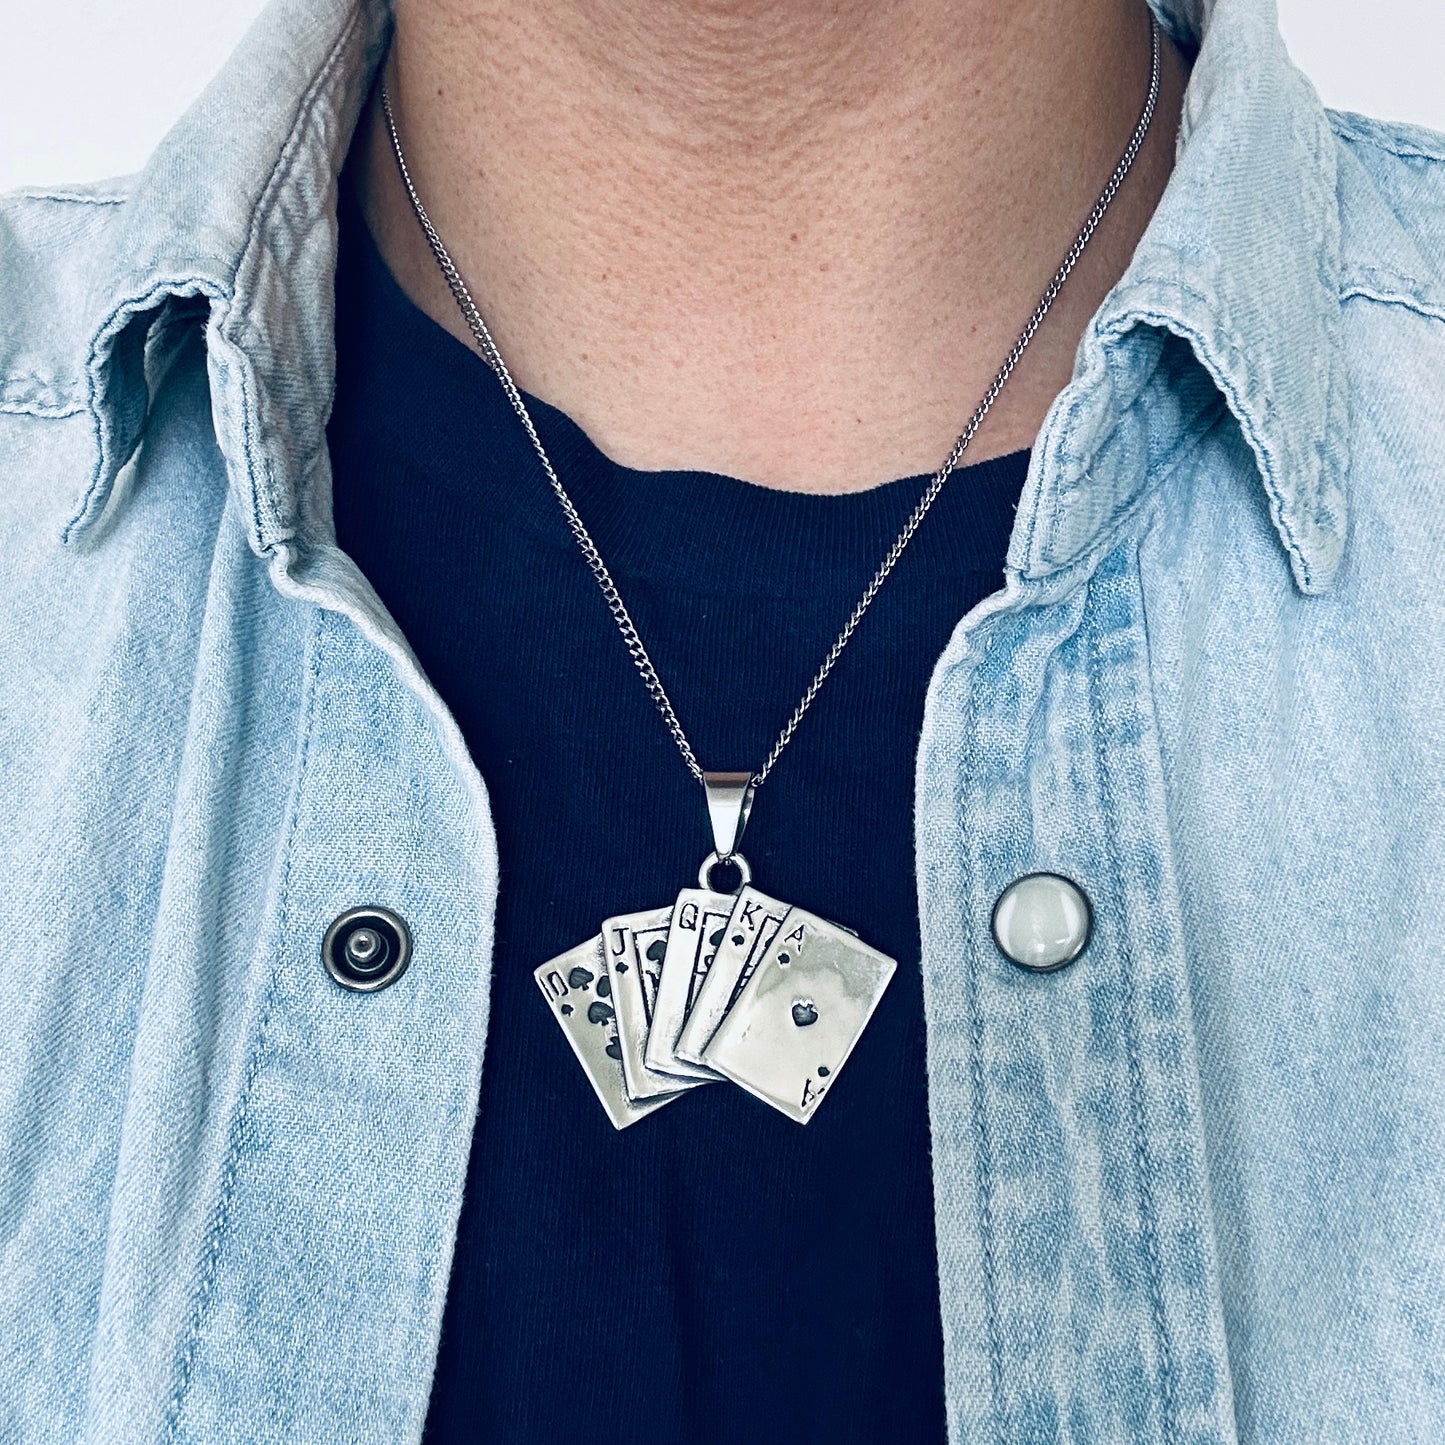 Straight Flush Pendant with Chain